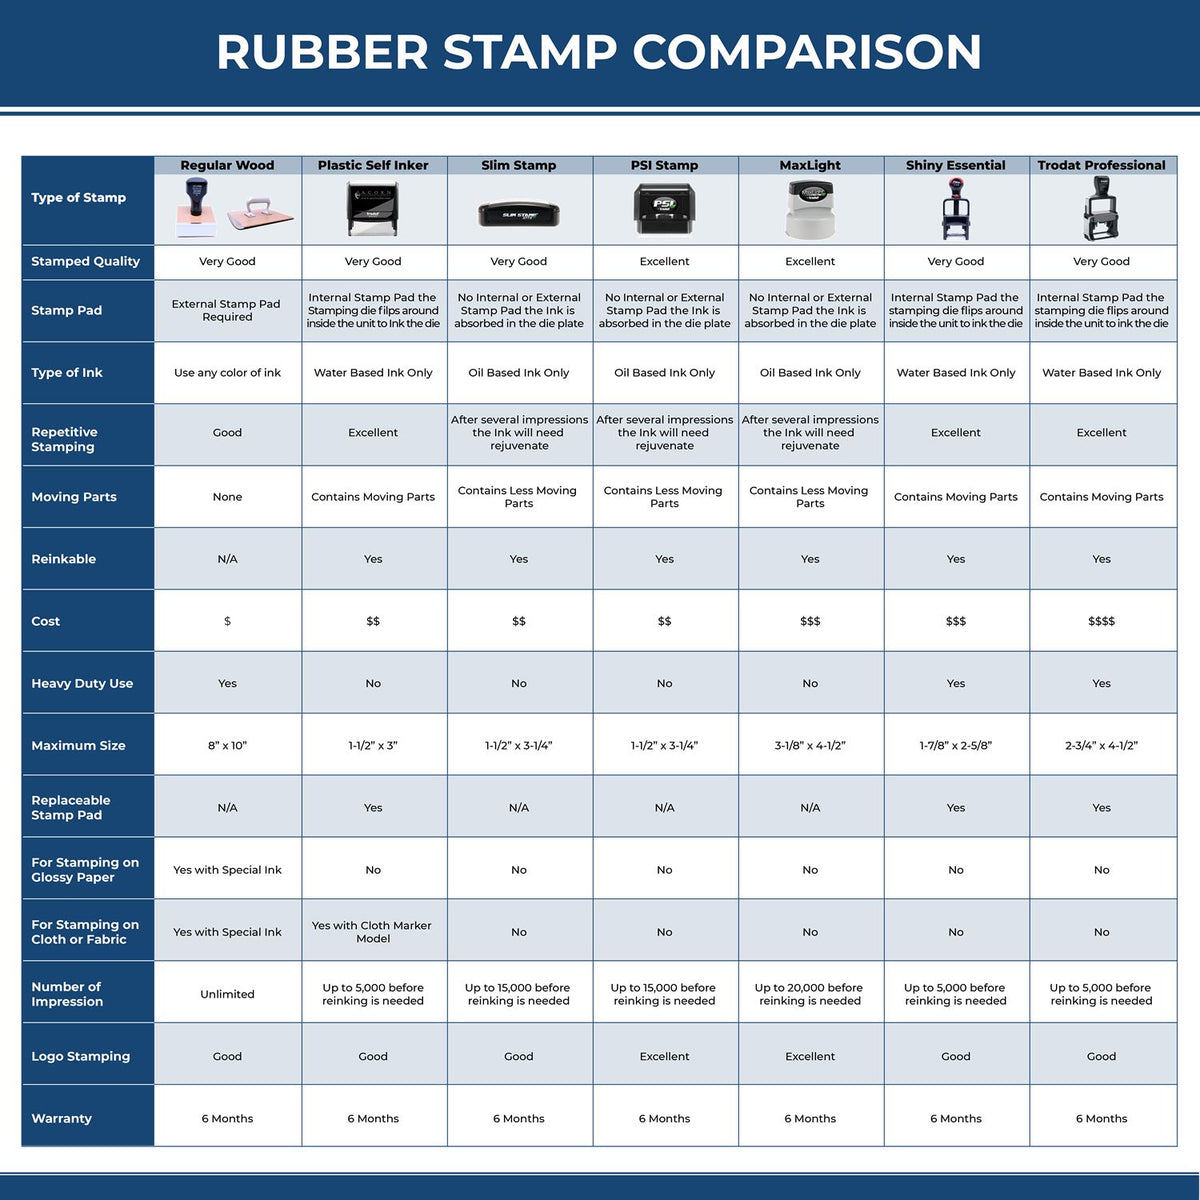 Large Self Inking Approved Stamp 4103S Rubber Stamp Comparison